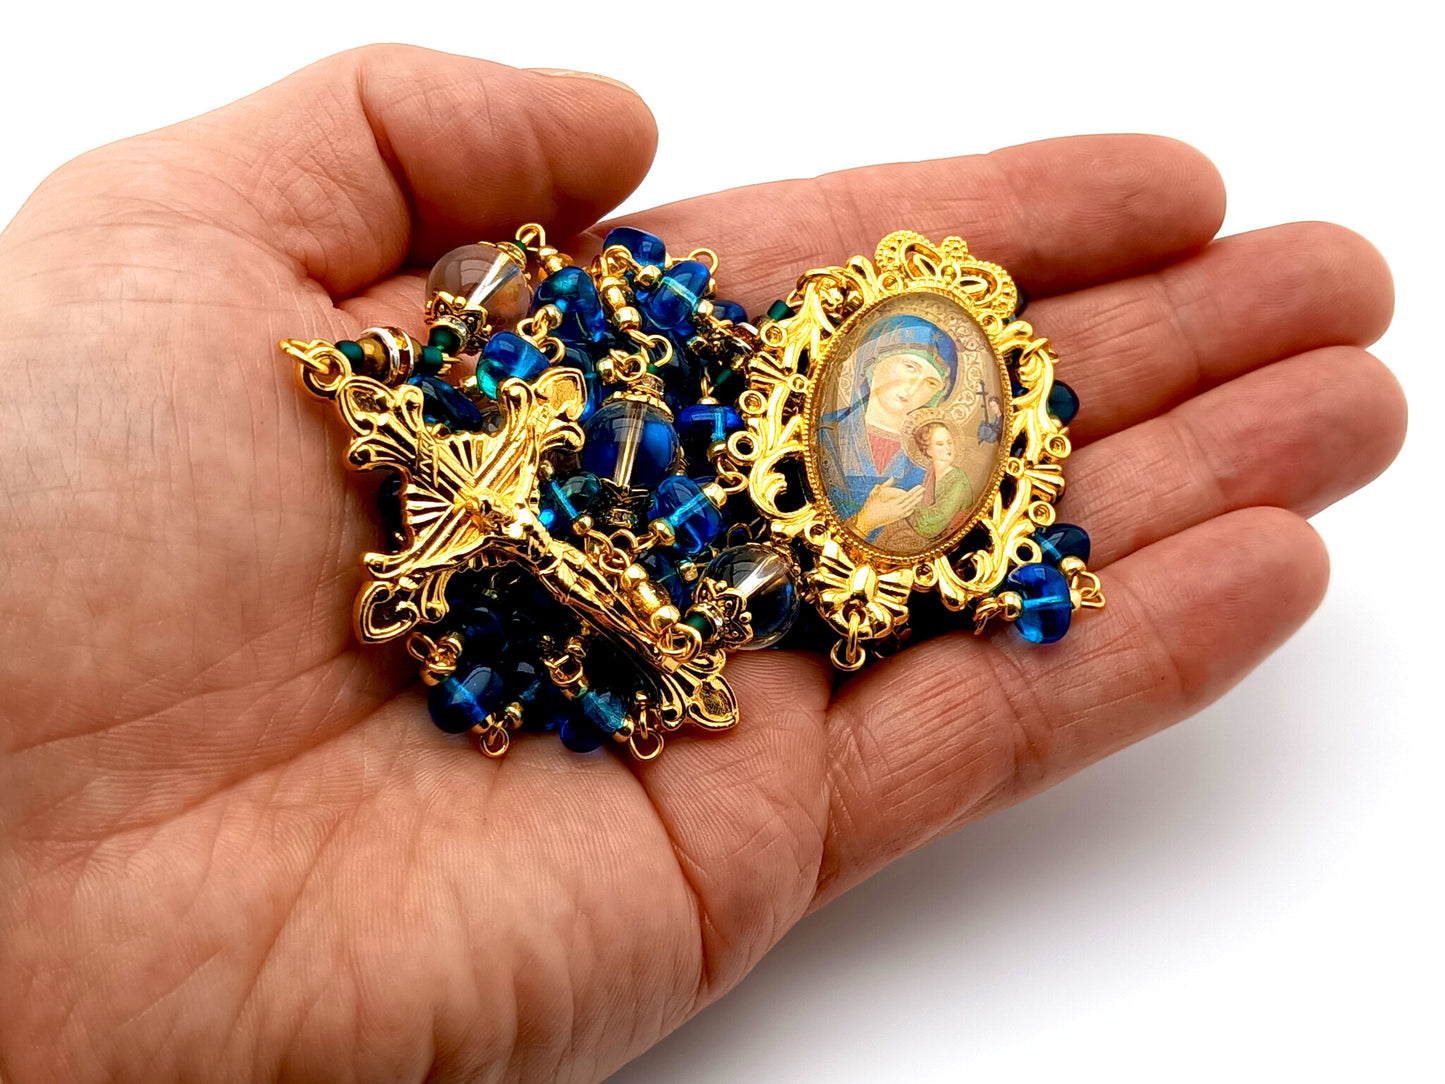 Our Lady of Perpetual Help unique rosary beads with nugget glass and crystal gemstone beads and gold plated sunburst crucifix.